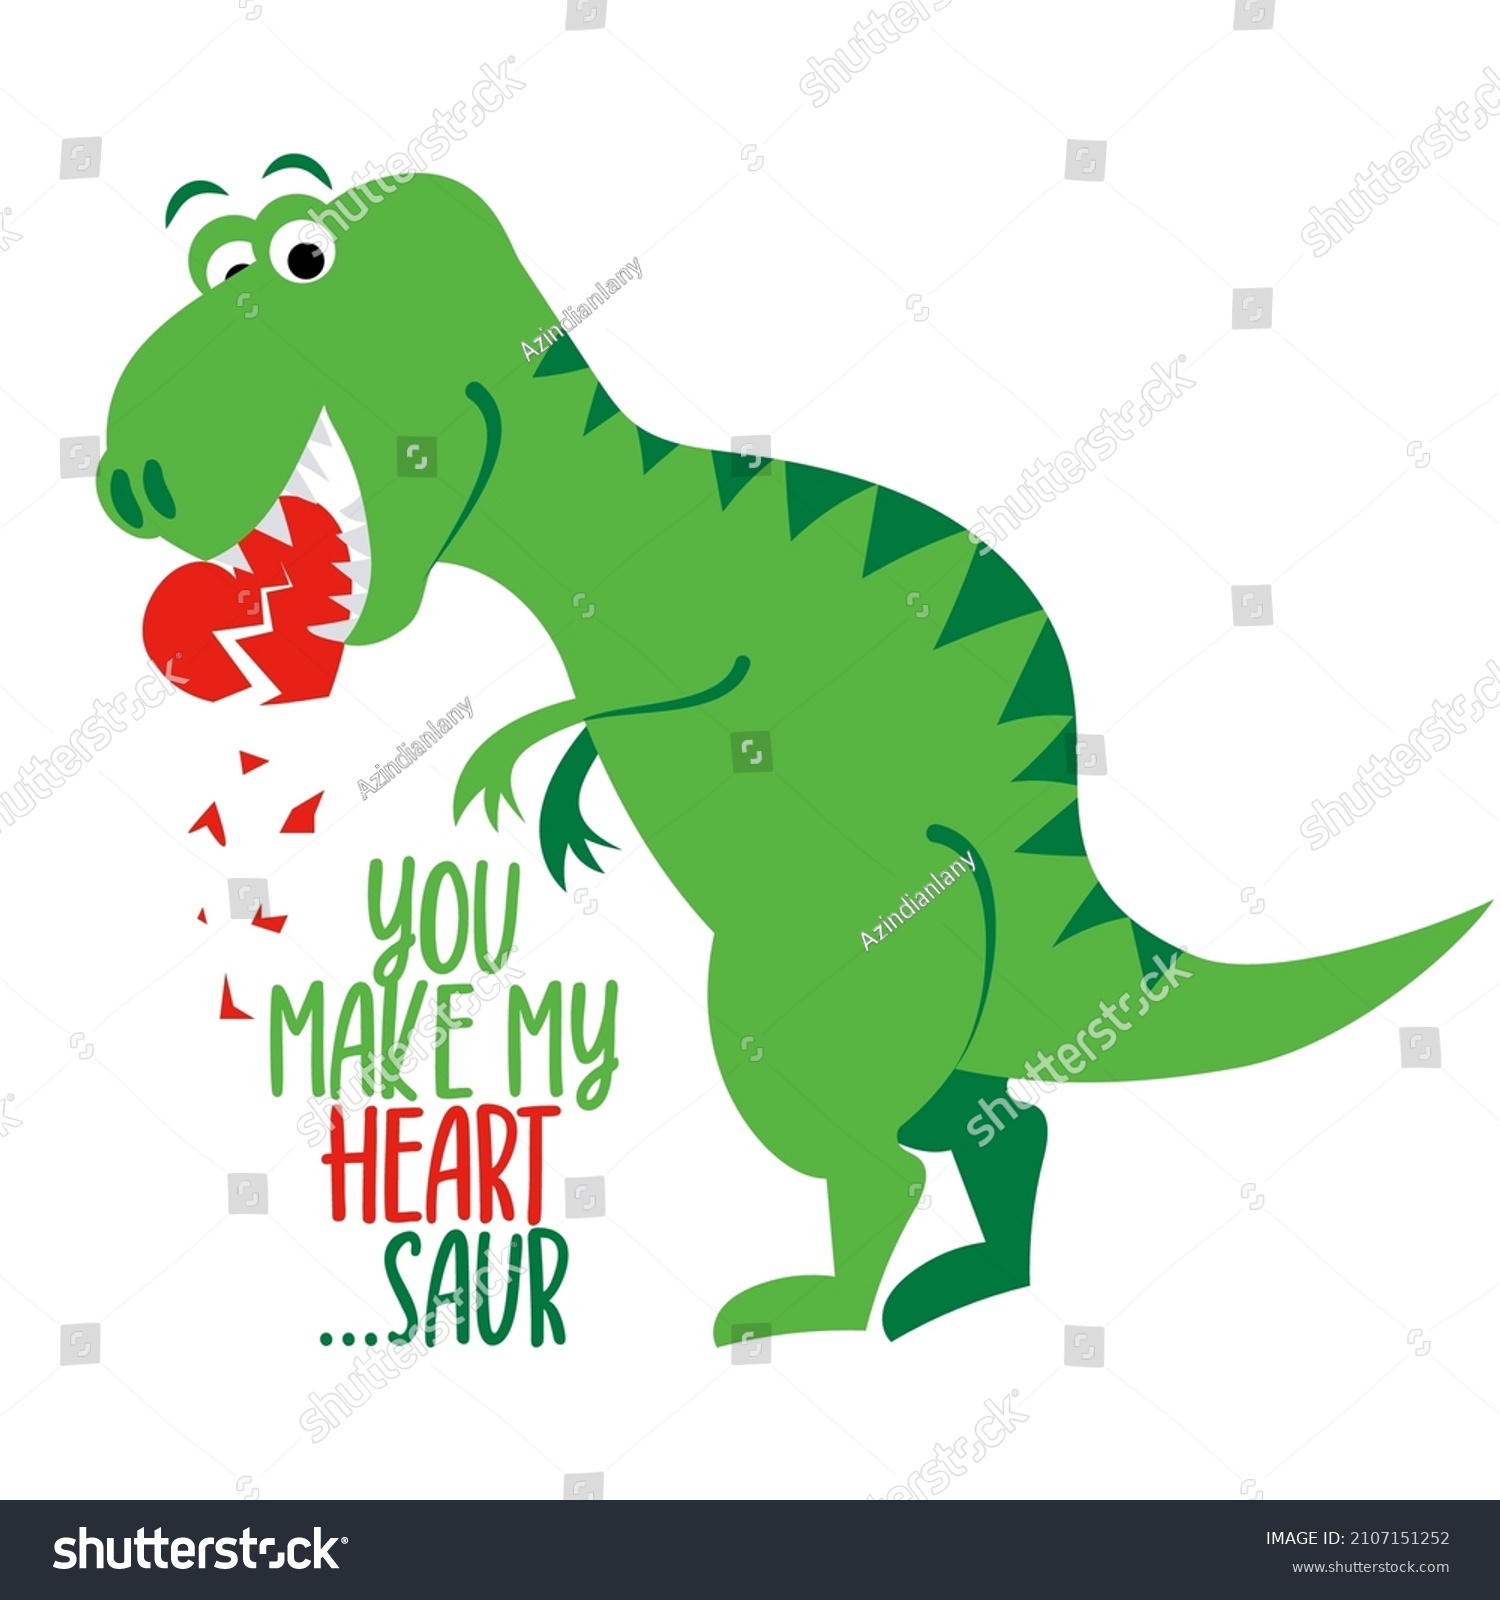 SVG of You make my heart saur - funny hand drawn doodle, cartoon dino. Good for Poster or t-shirt textile graphic design. Vector hand drawn illustration. Happy Valentine's Day! svg